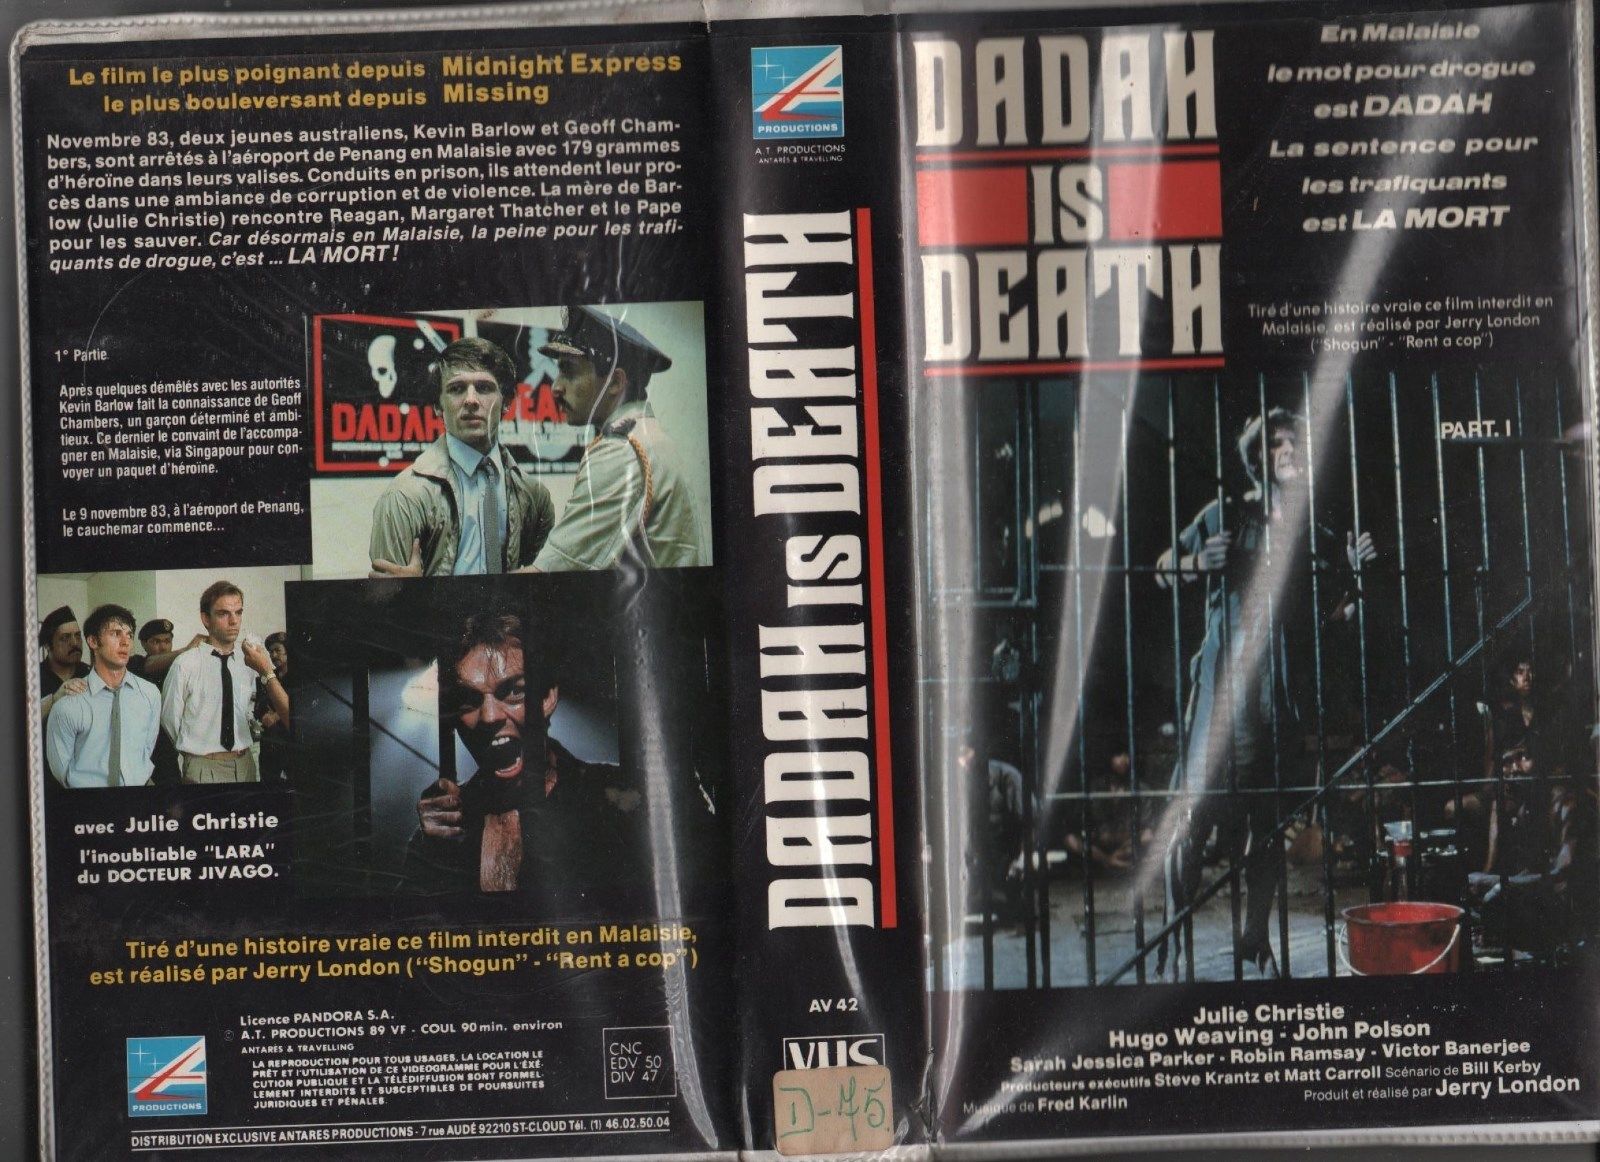 Dadah is Death VHS cover. If you dunno what VHS is, you're too young. Image from PicClick